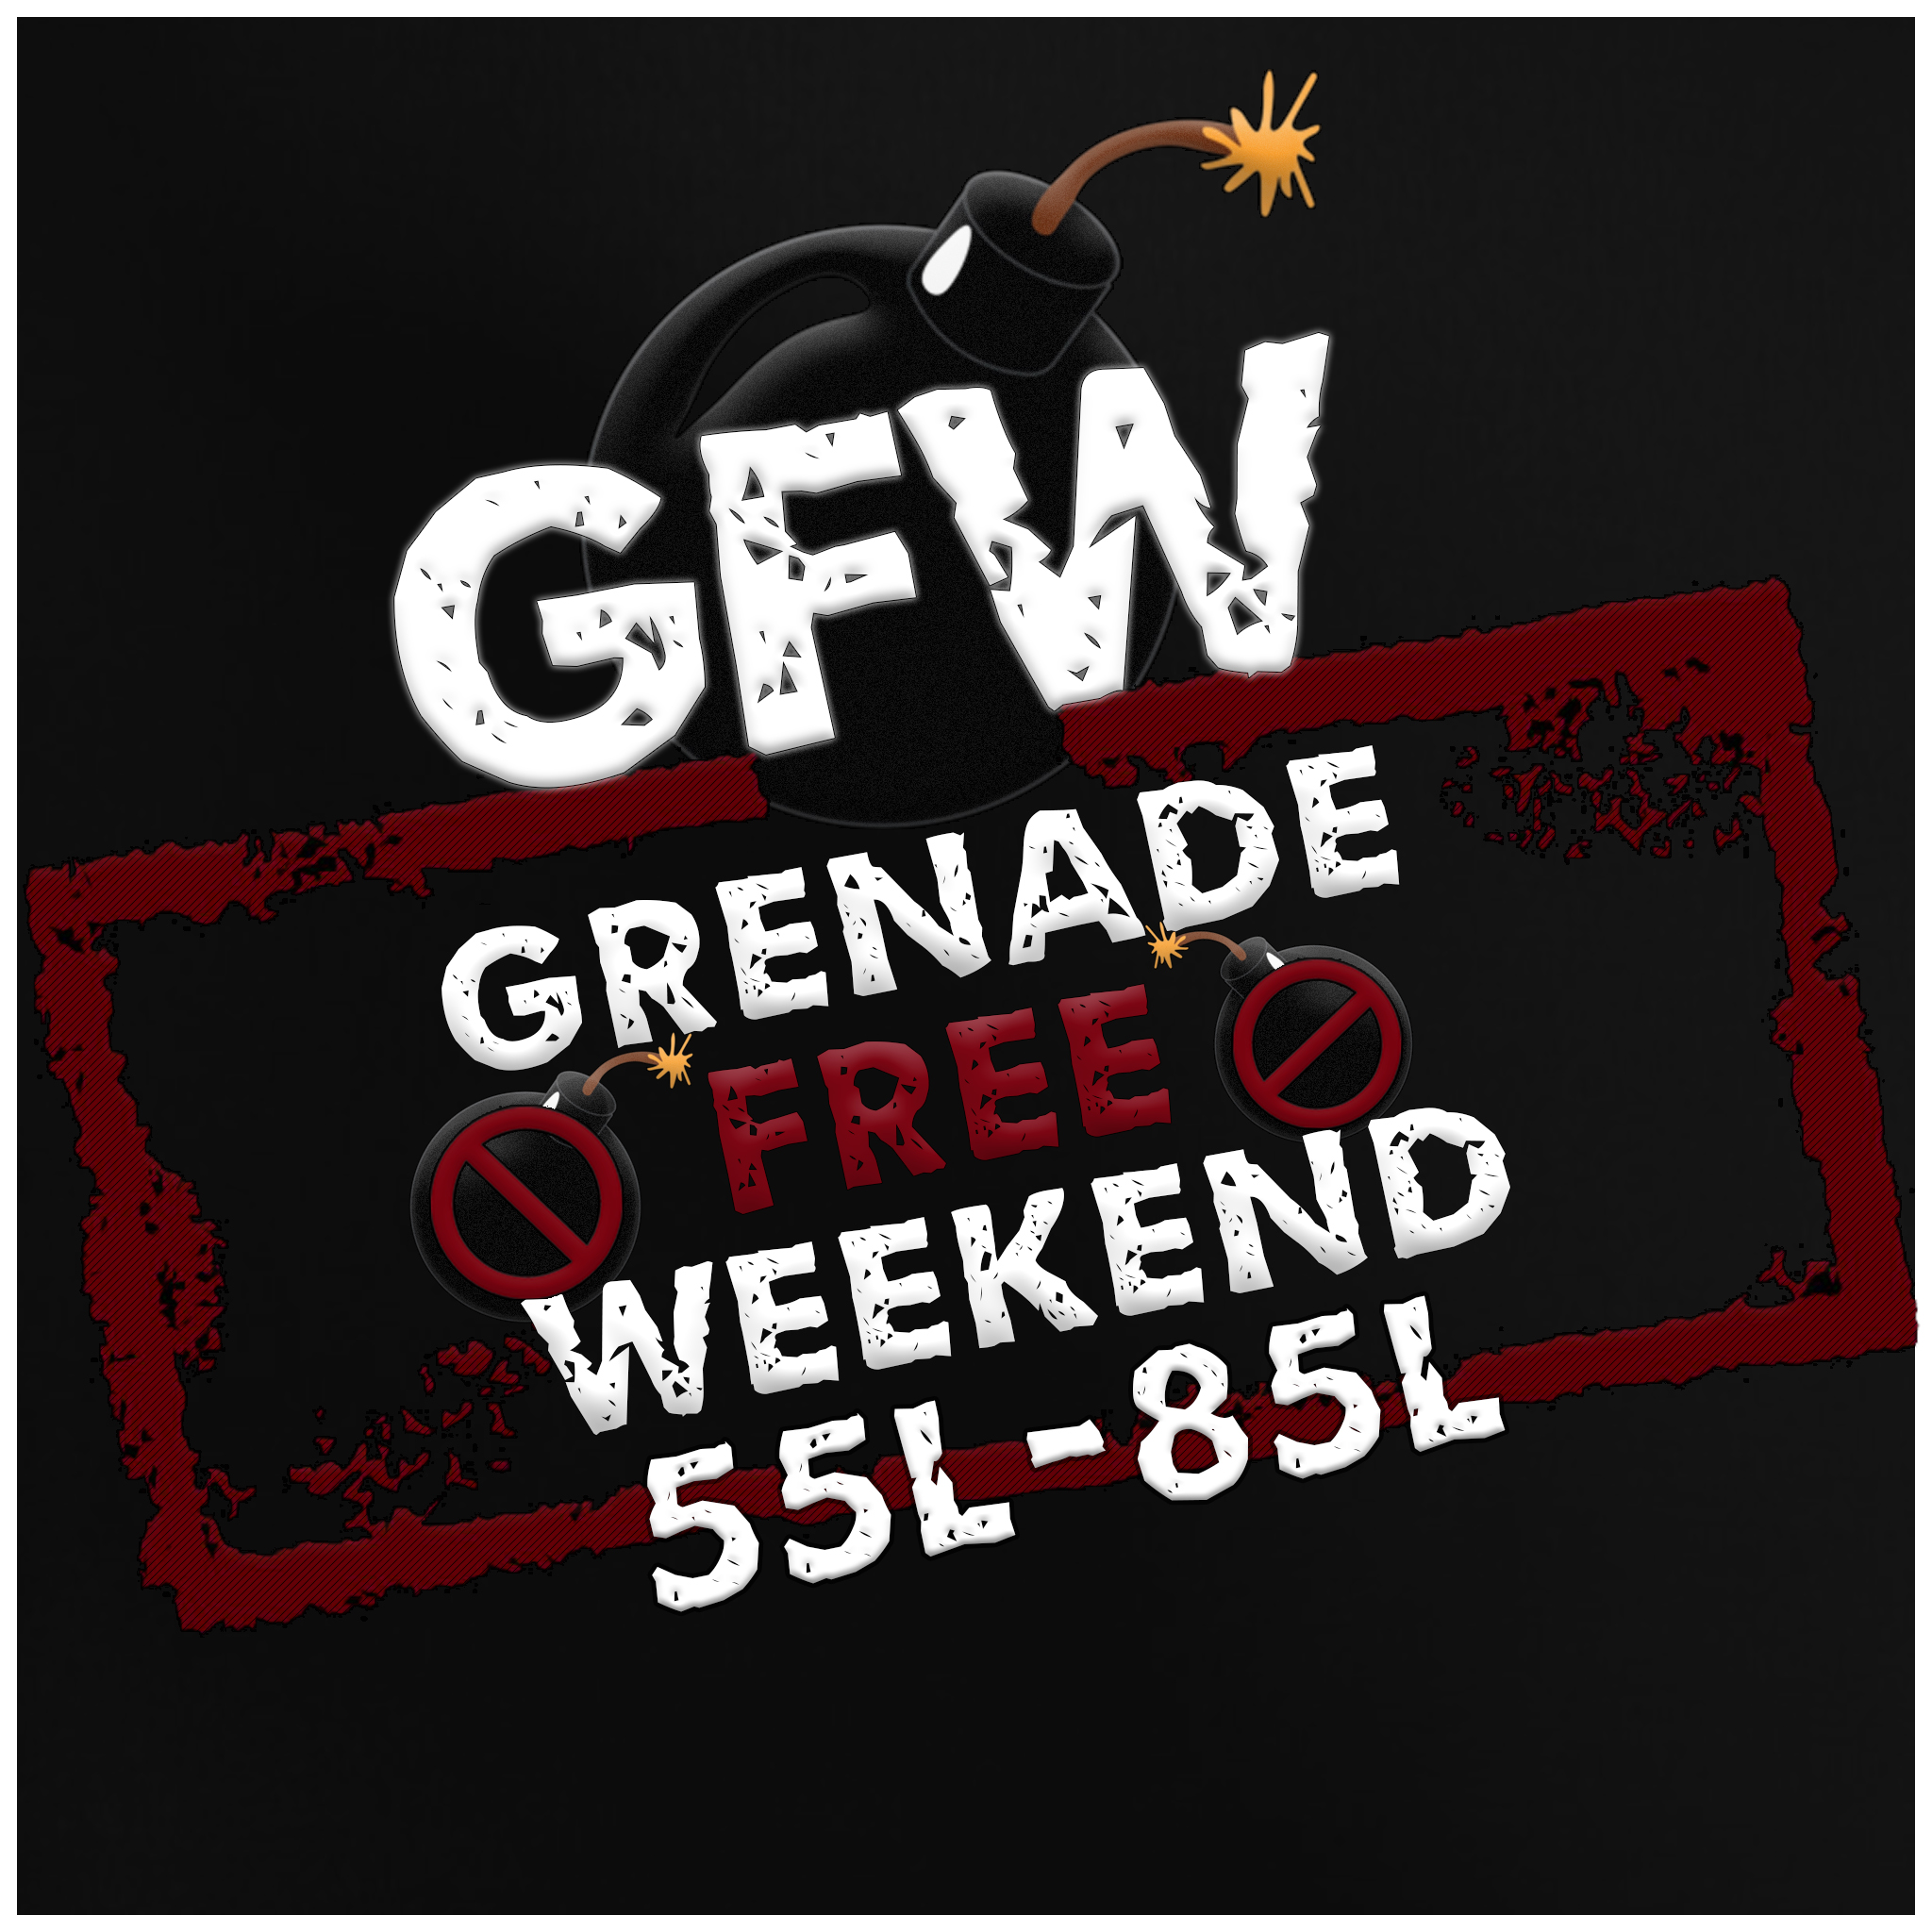 AWESOMENESS FOR YOUR WALLET AT GRENADE FREE WEEKEND